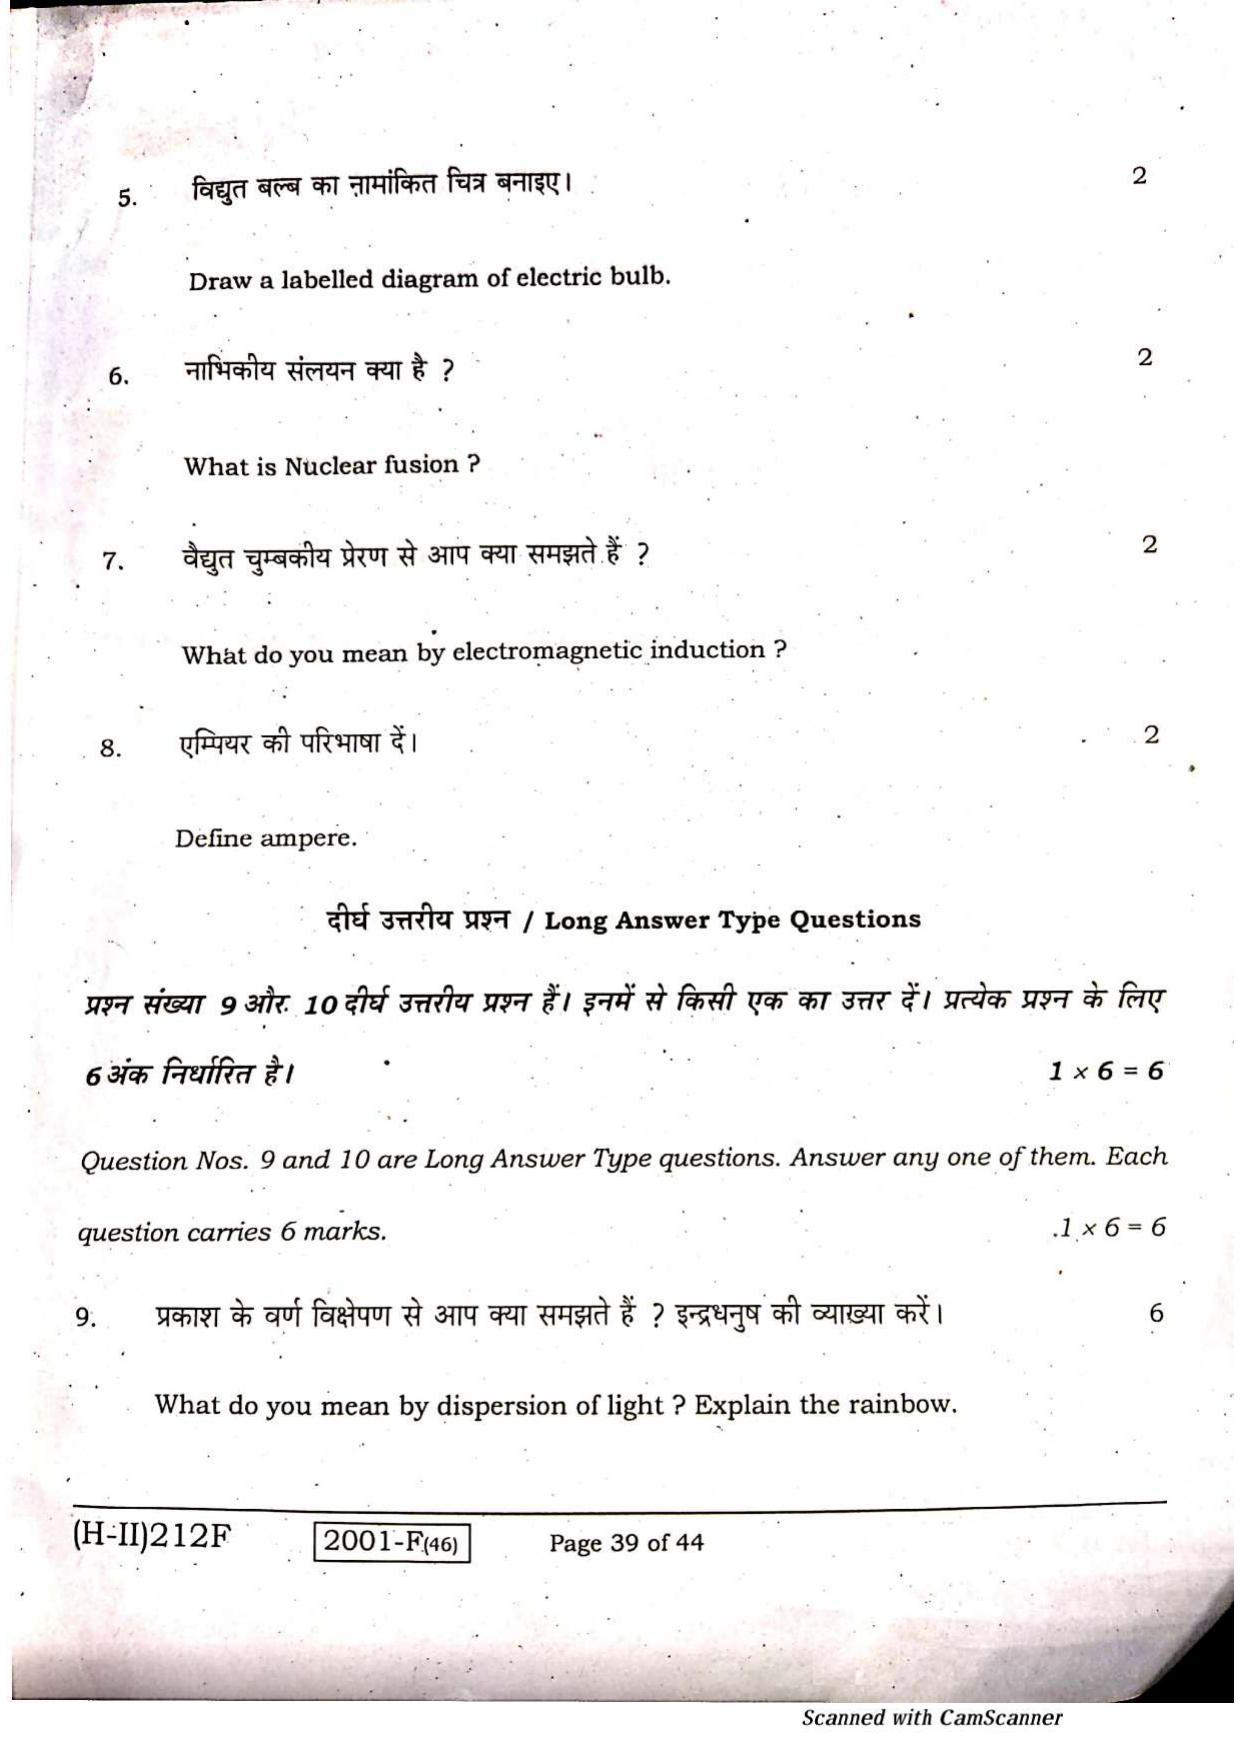 Bihar Board Class 10 Science 2021 (2nd Sitting) Question Paper - Page 37